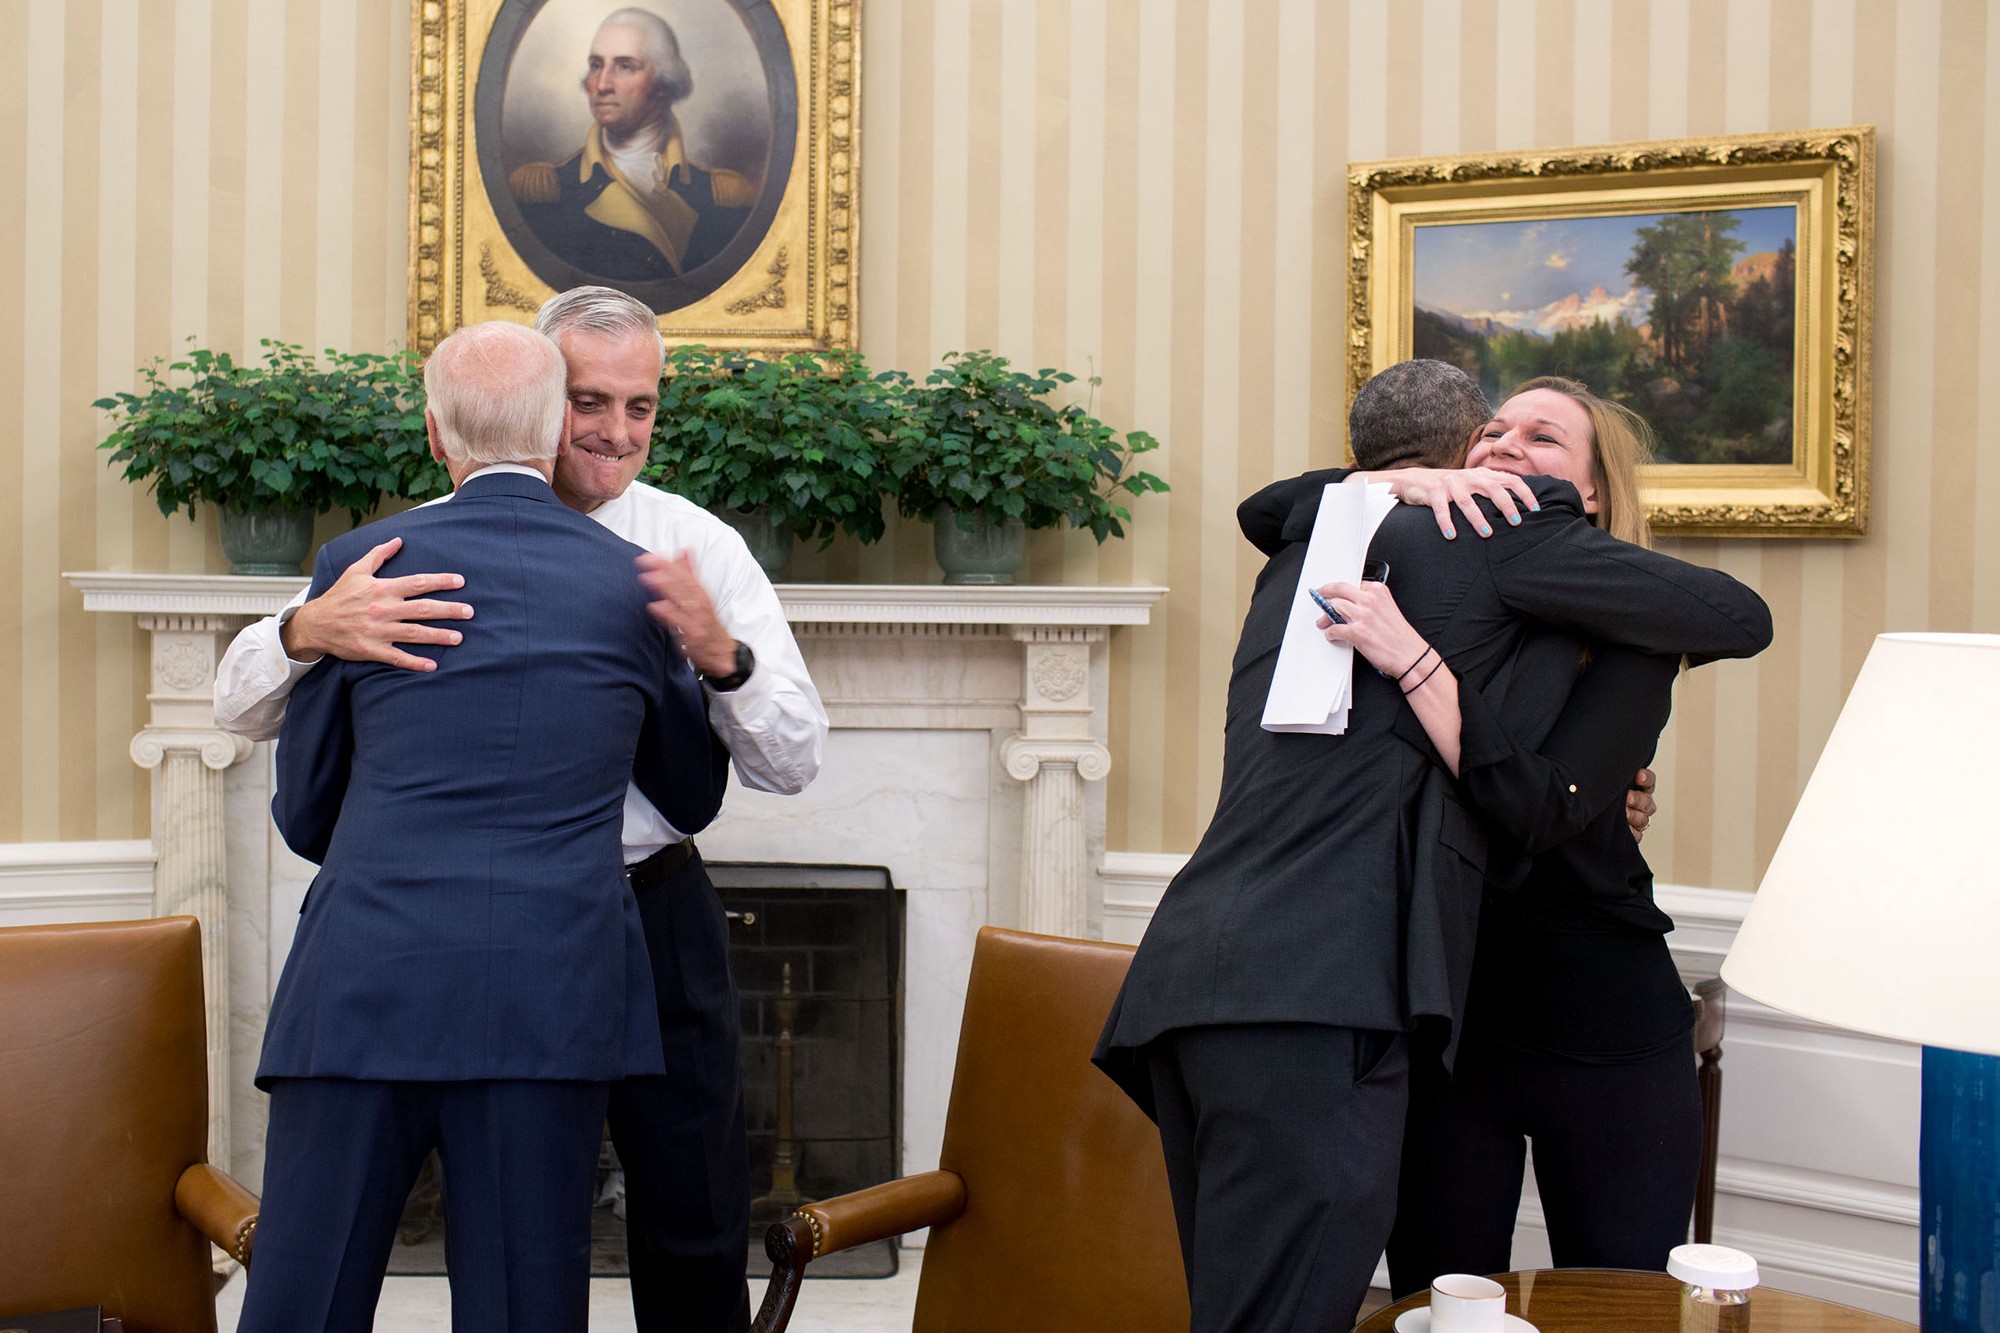 The President hugs Kristie Canegallo as the Vice President hugs McDonough. (Official White House Photo by Pete Souza)